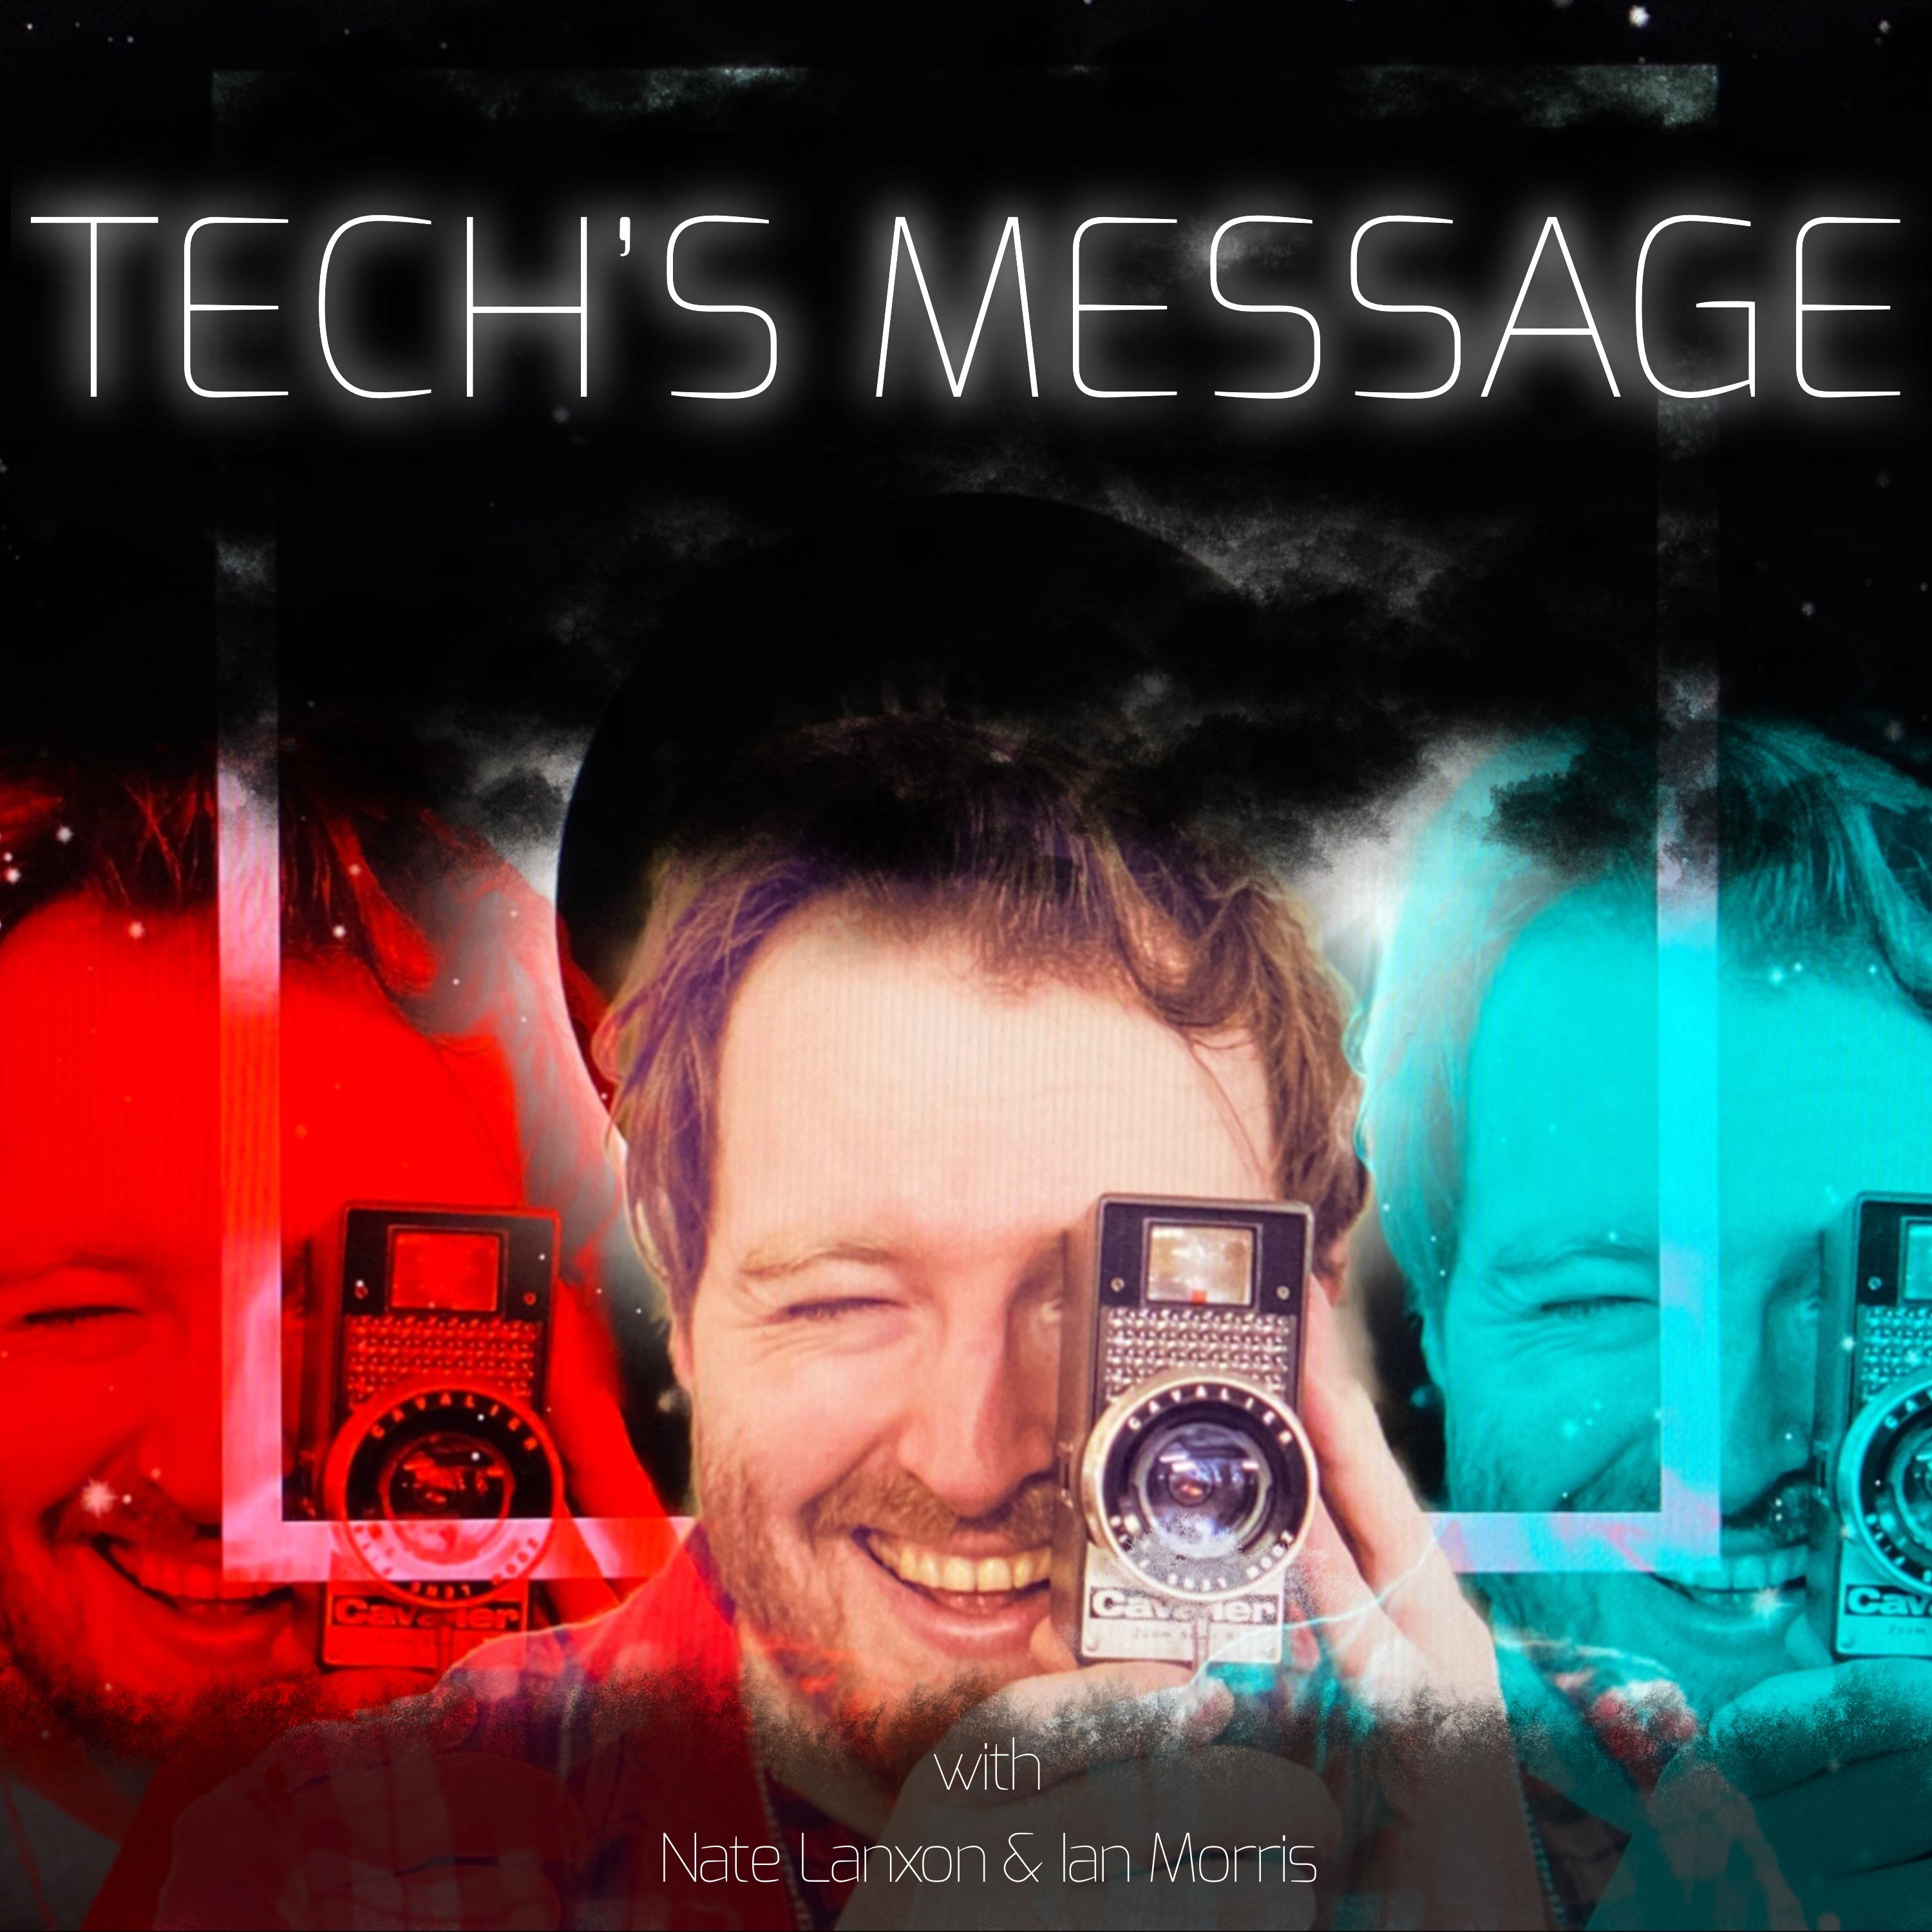 Deep Packet Inspection Comes To UK Mobile Advertising. Oh Cheers, Three! TM 61